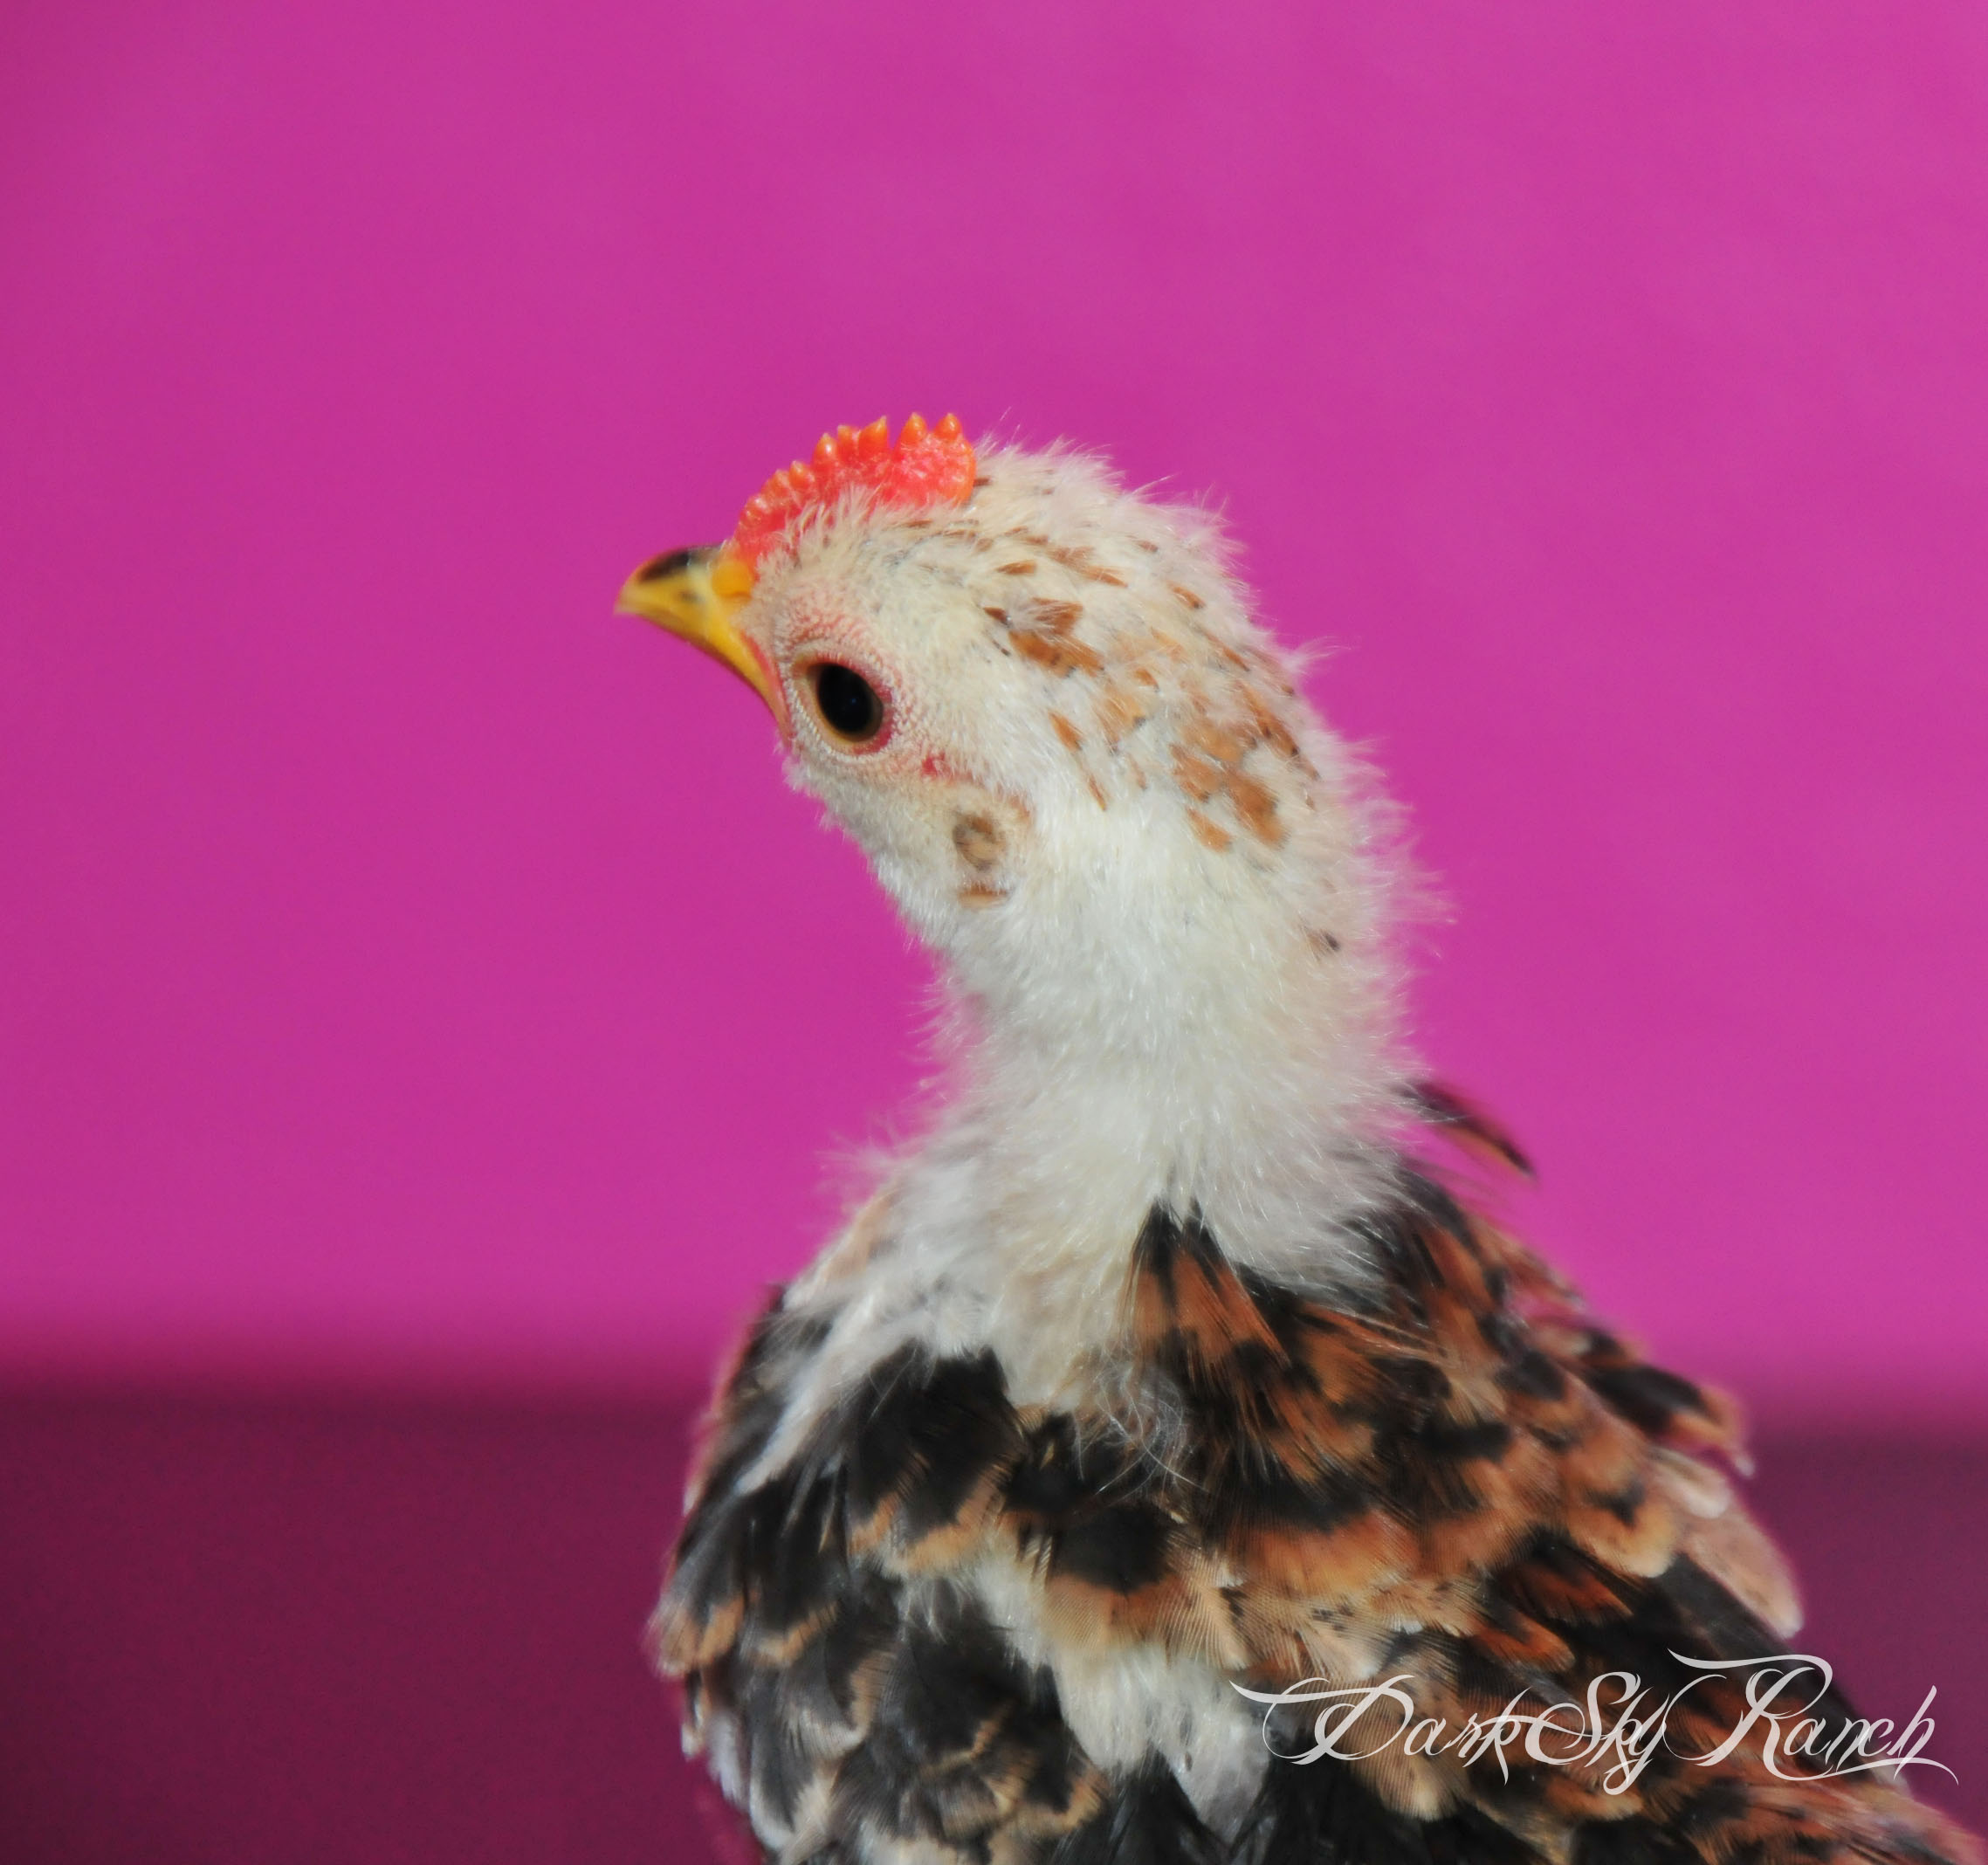 This is my first little serama, We named him Zero.  Since he was bird "zero" of the serama epidemic, leading to the purchase of 3 other serama chicks.  Here he is approx 9 weeks old here.